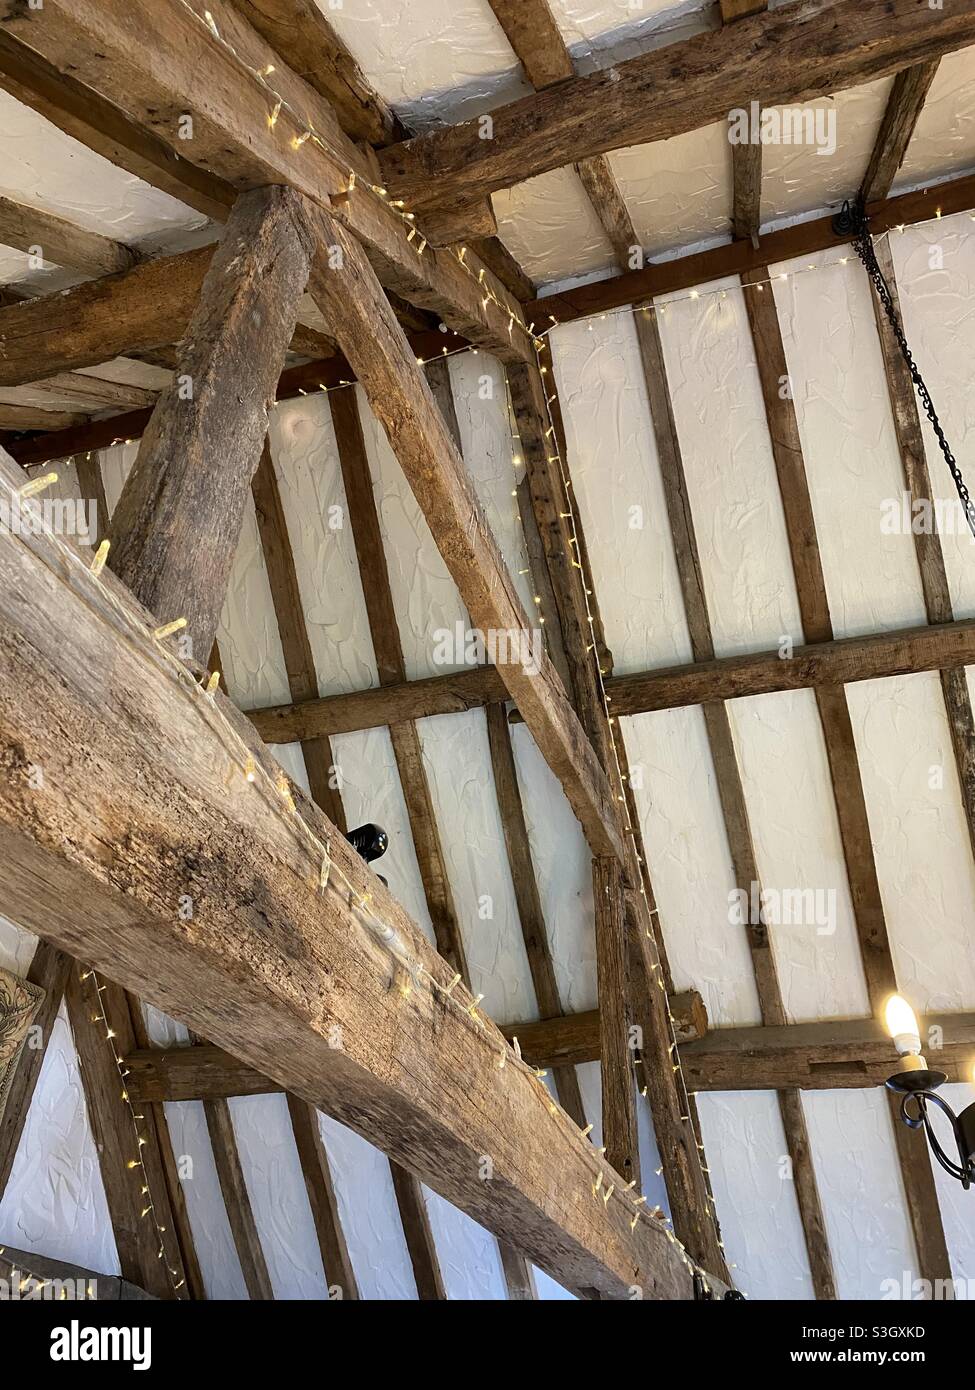 Wooden barn ceiling Stock Photo